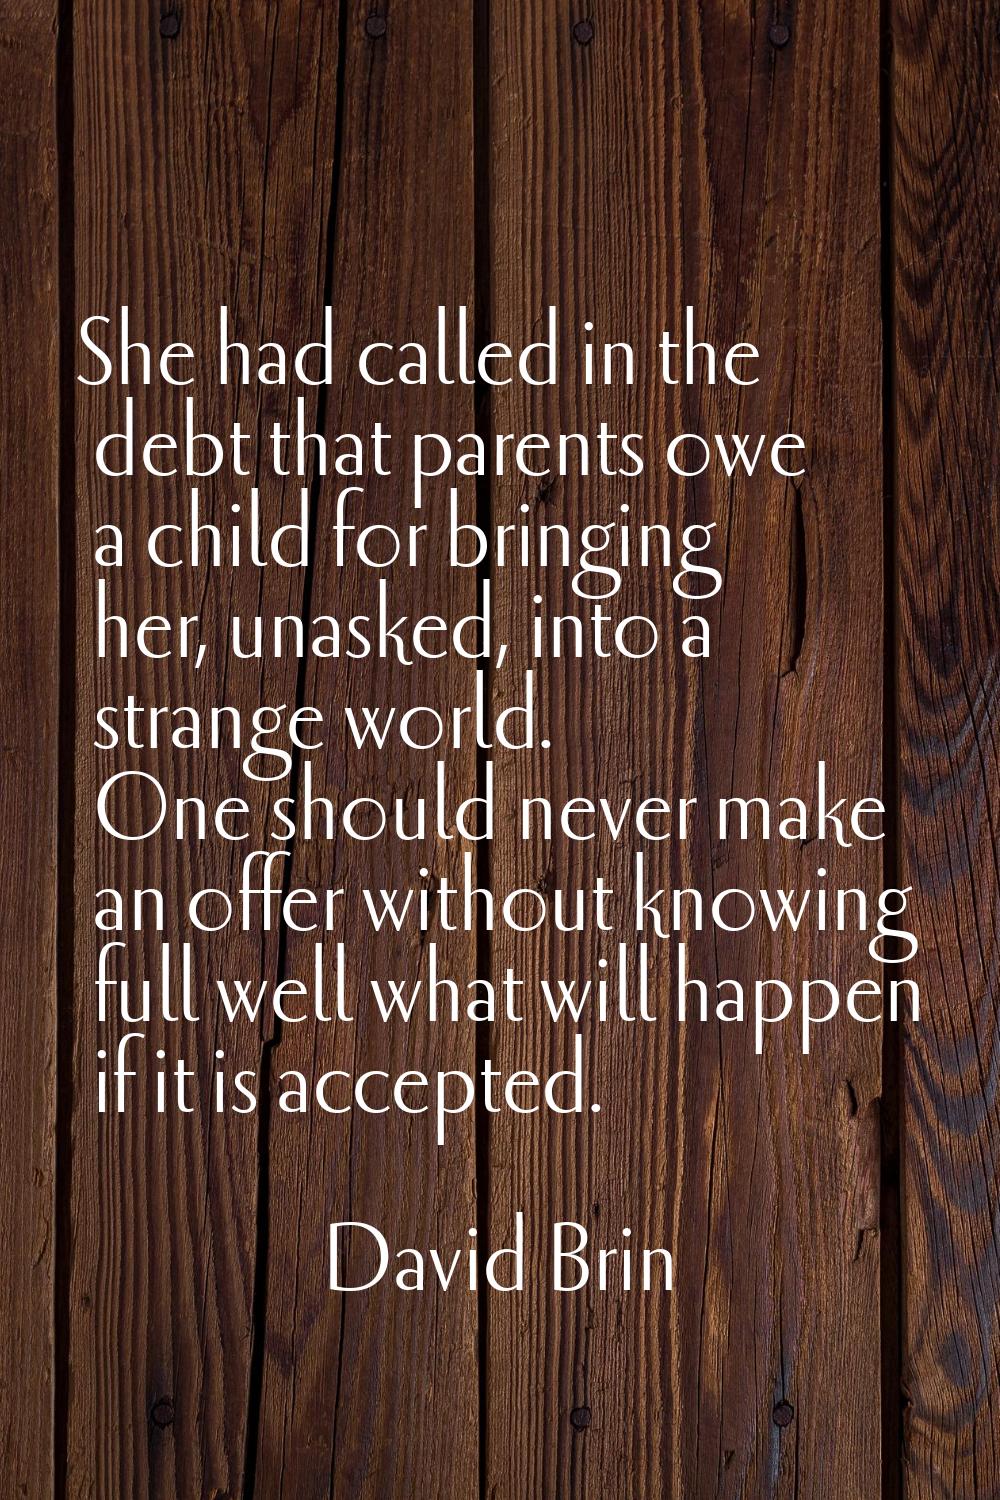 She had called in the debt that parents owe a child for bringing her, unasked, into a strange world